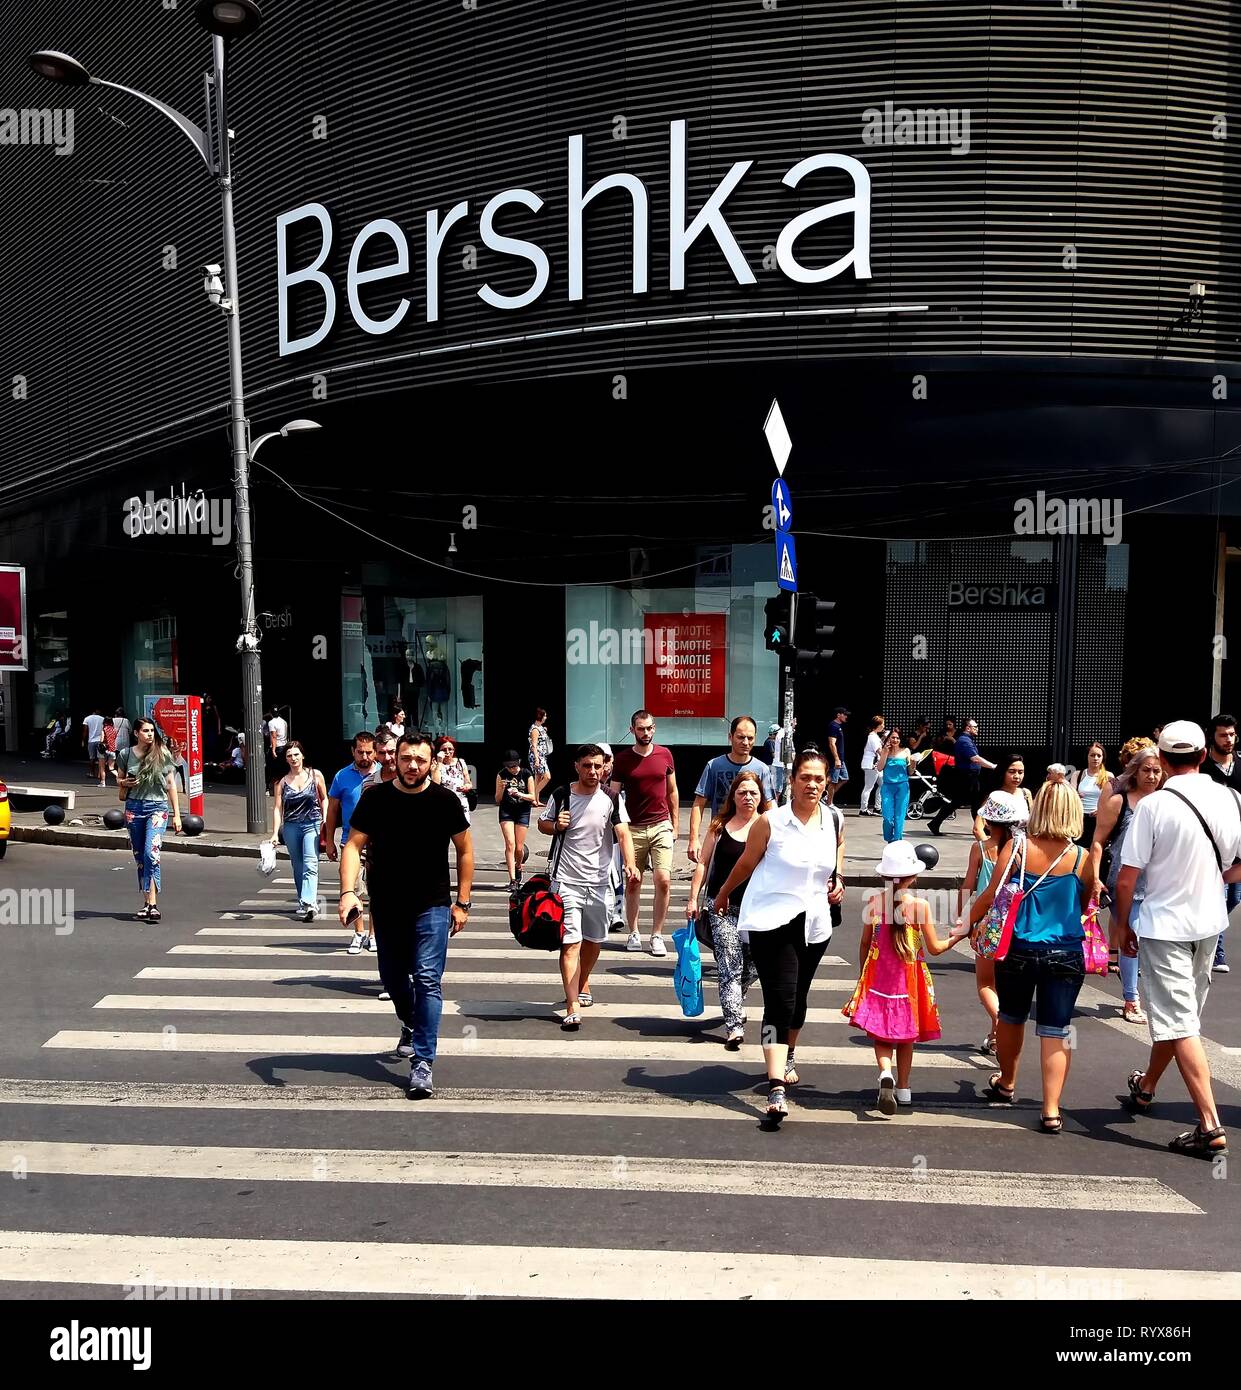 Bucharest, Romania - July 20, 2017: View with pedestrian crossing from the  Bershka shop located in Unirea Shopping Center, in Unirii Square, Bucharest  Stock Photo - Alamy